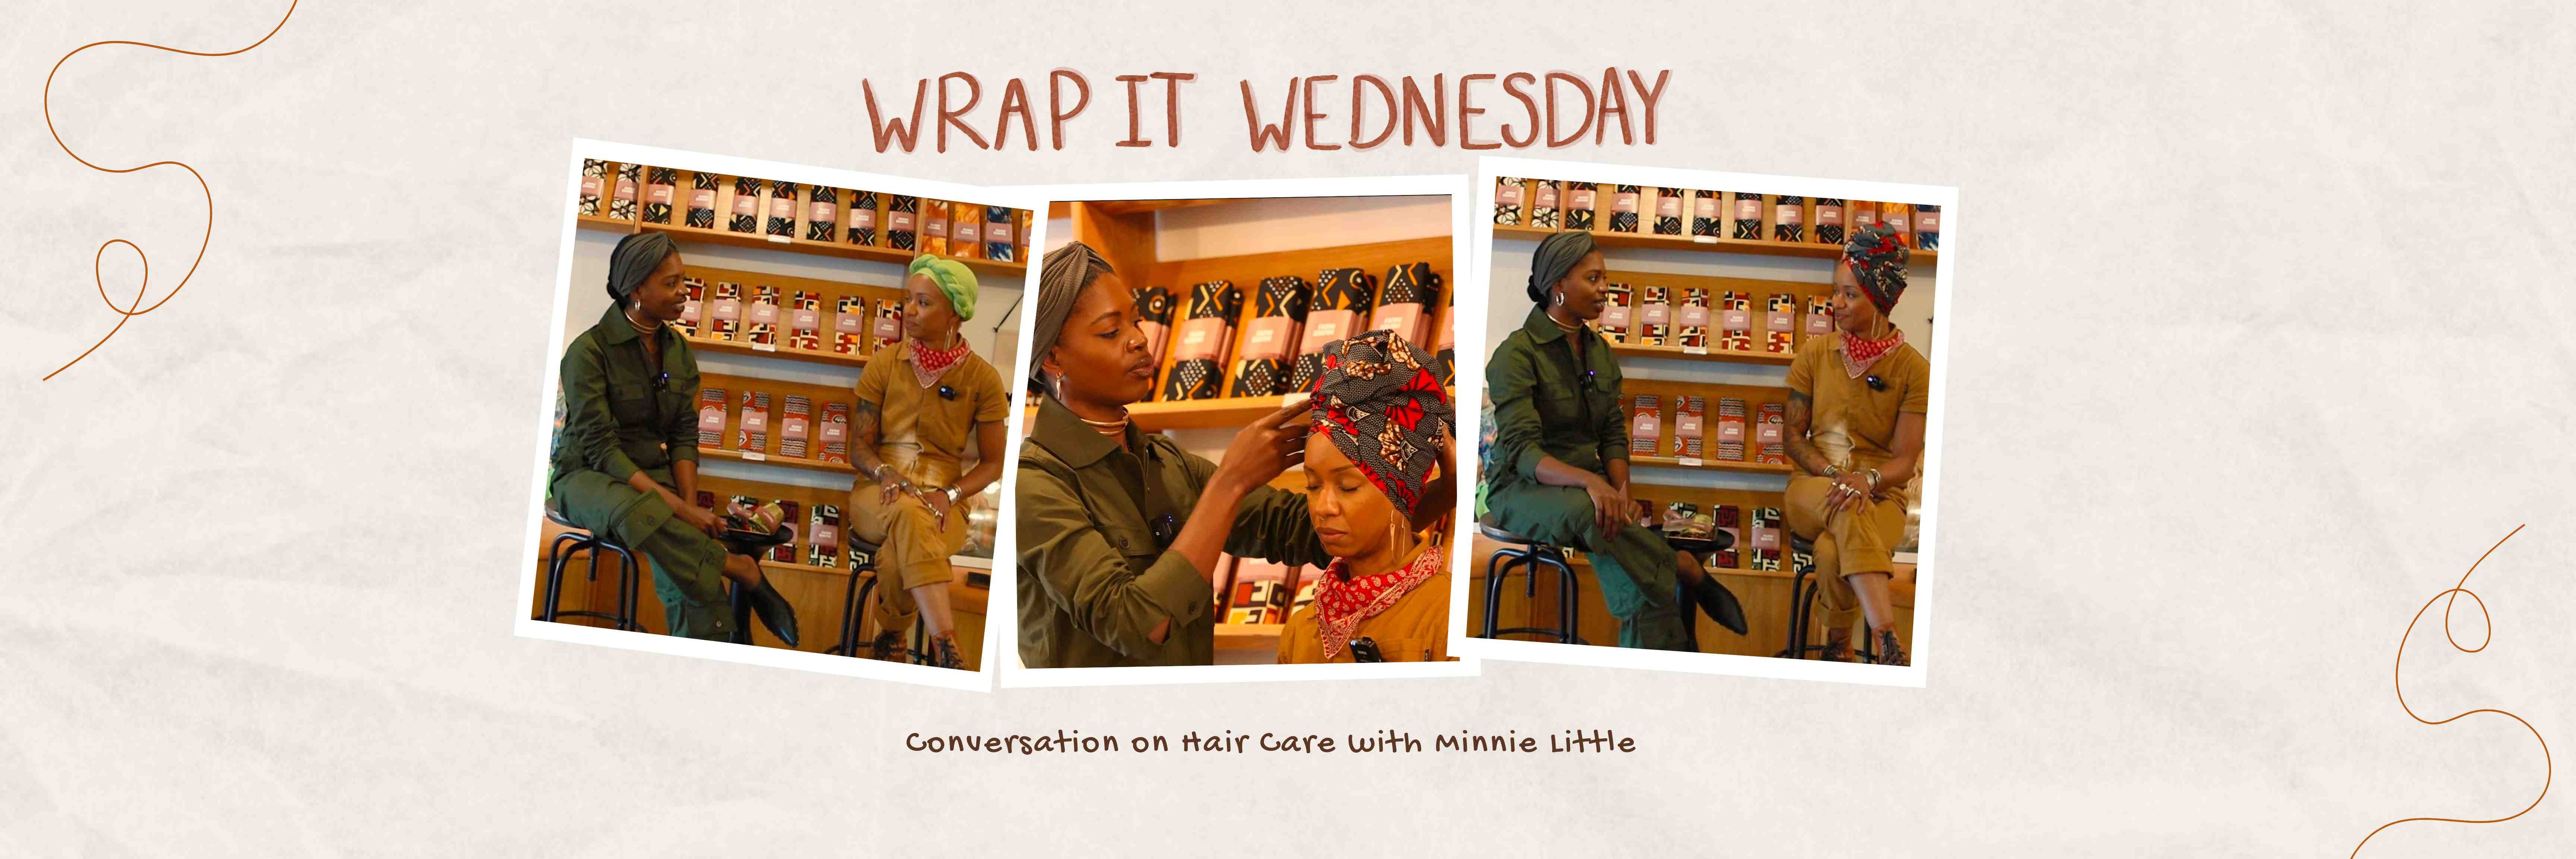 Wrap it Wednesday: Conversation on Entrepreneurship in the Hair Care Industry with Minnie Little